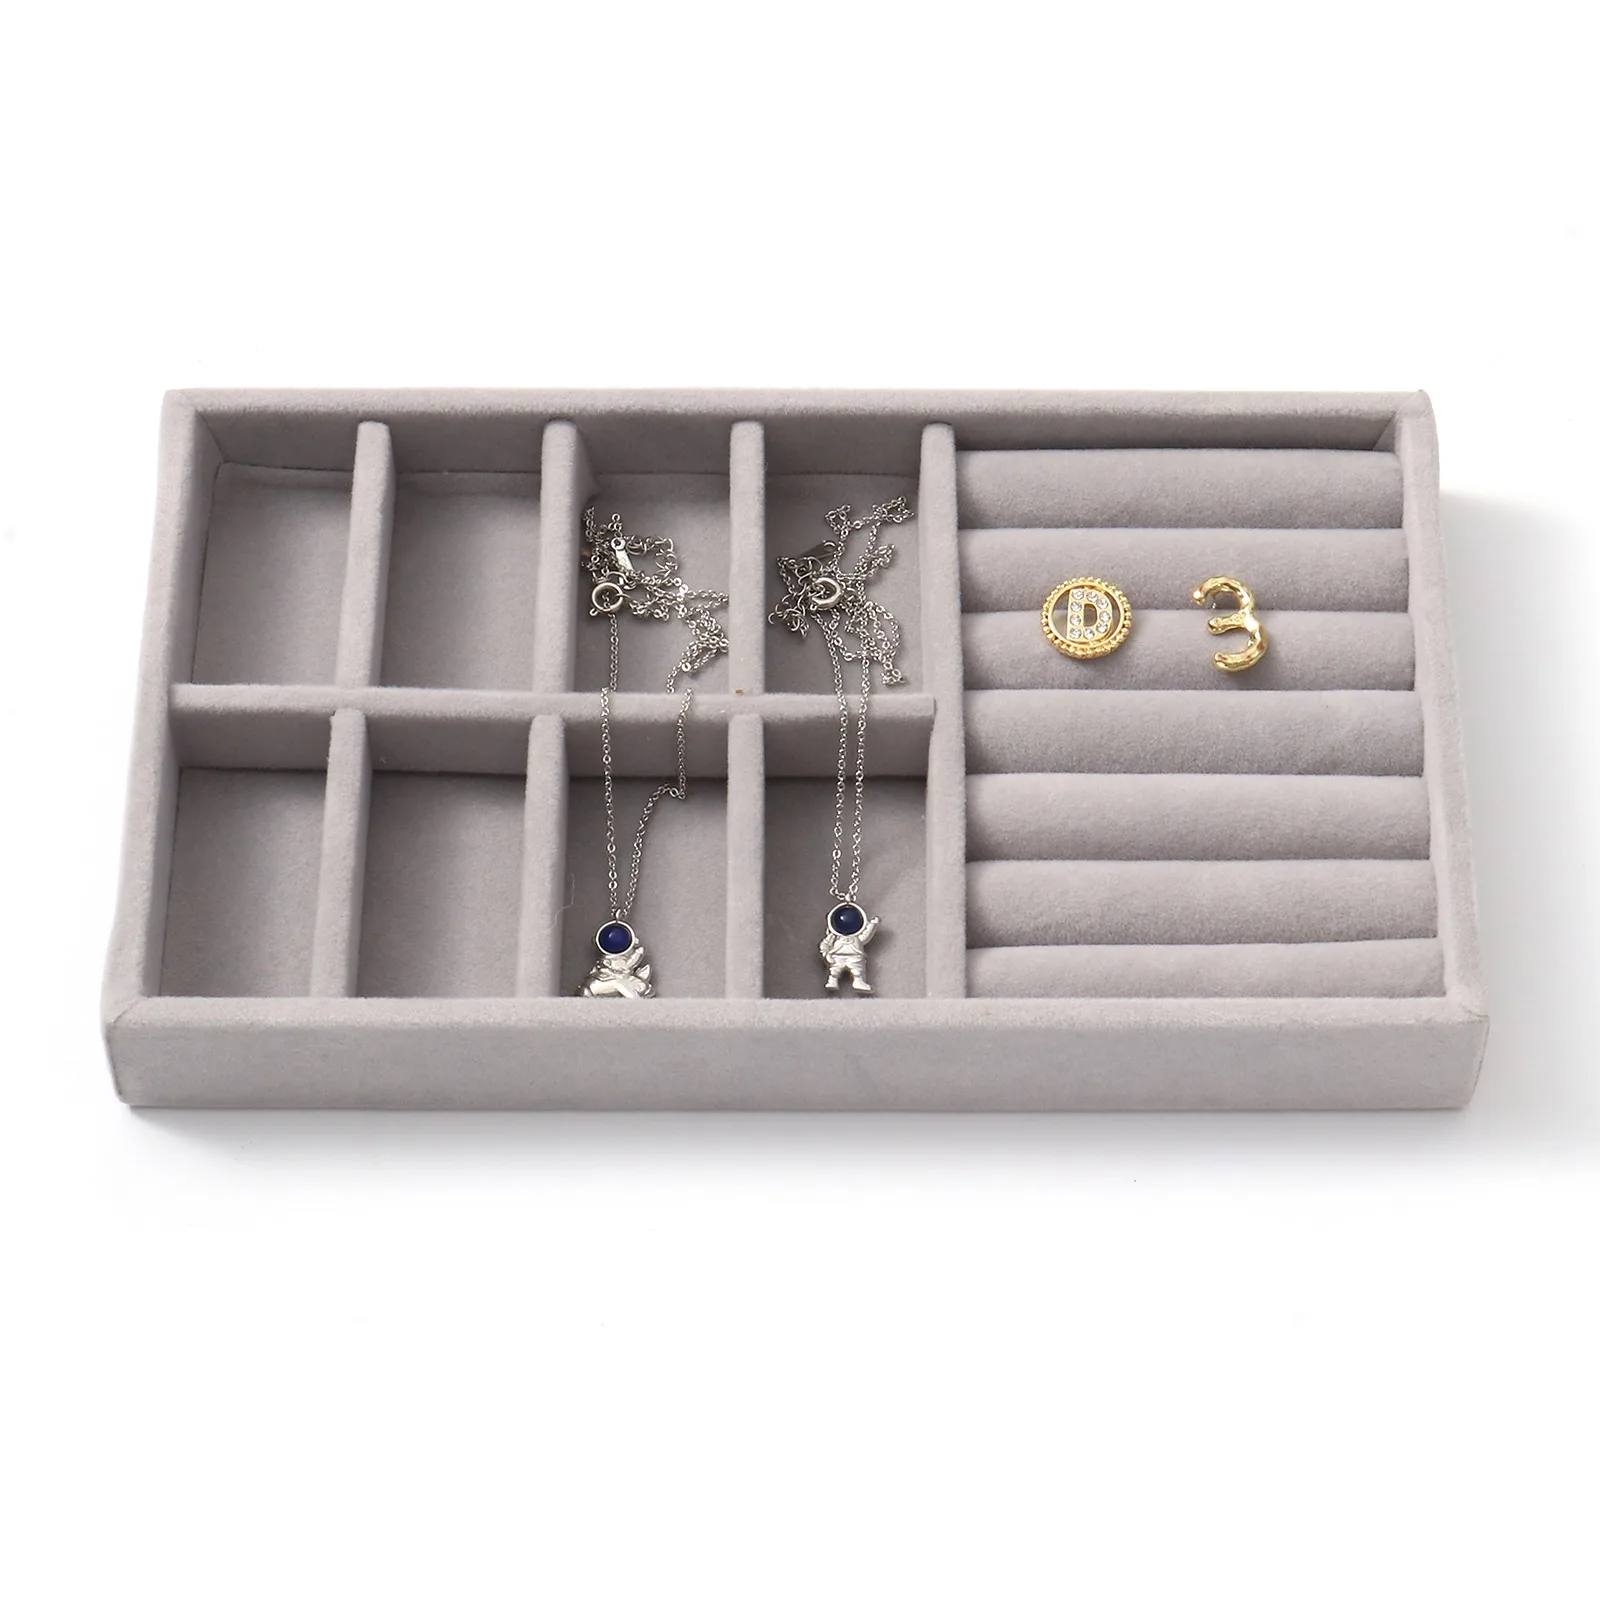 Velvet Jewelry Displays Rectangle Color for Rings Earrings Organizer Box  Tray Holder Jewelry Storage Case Showcase